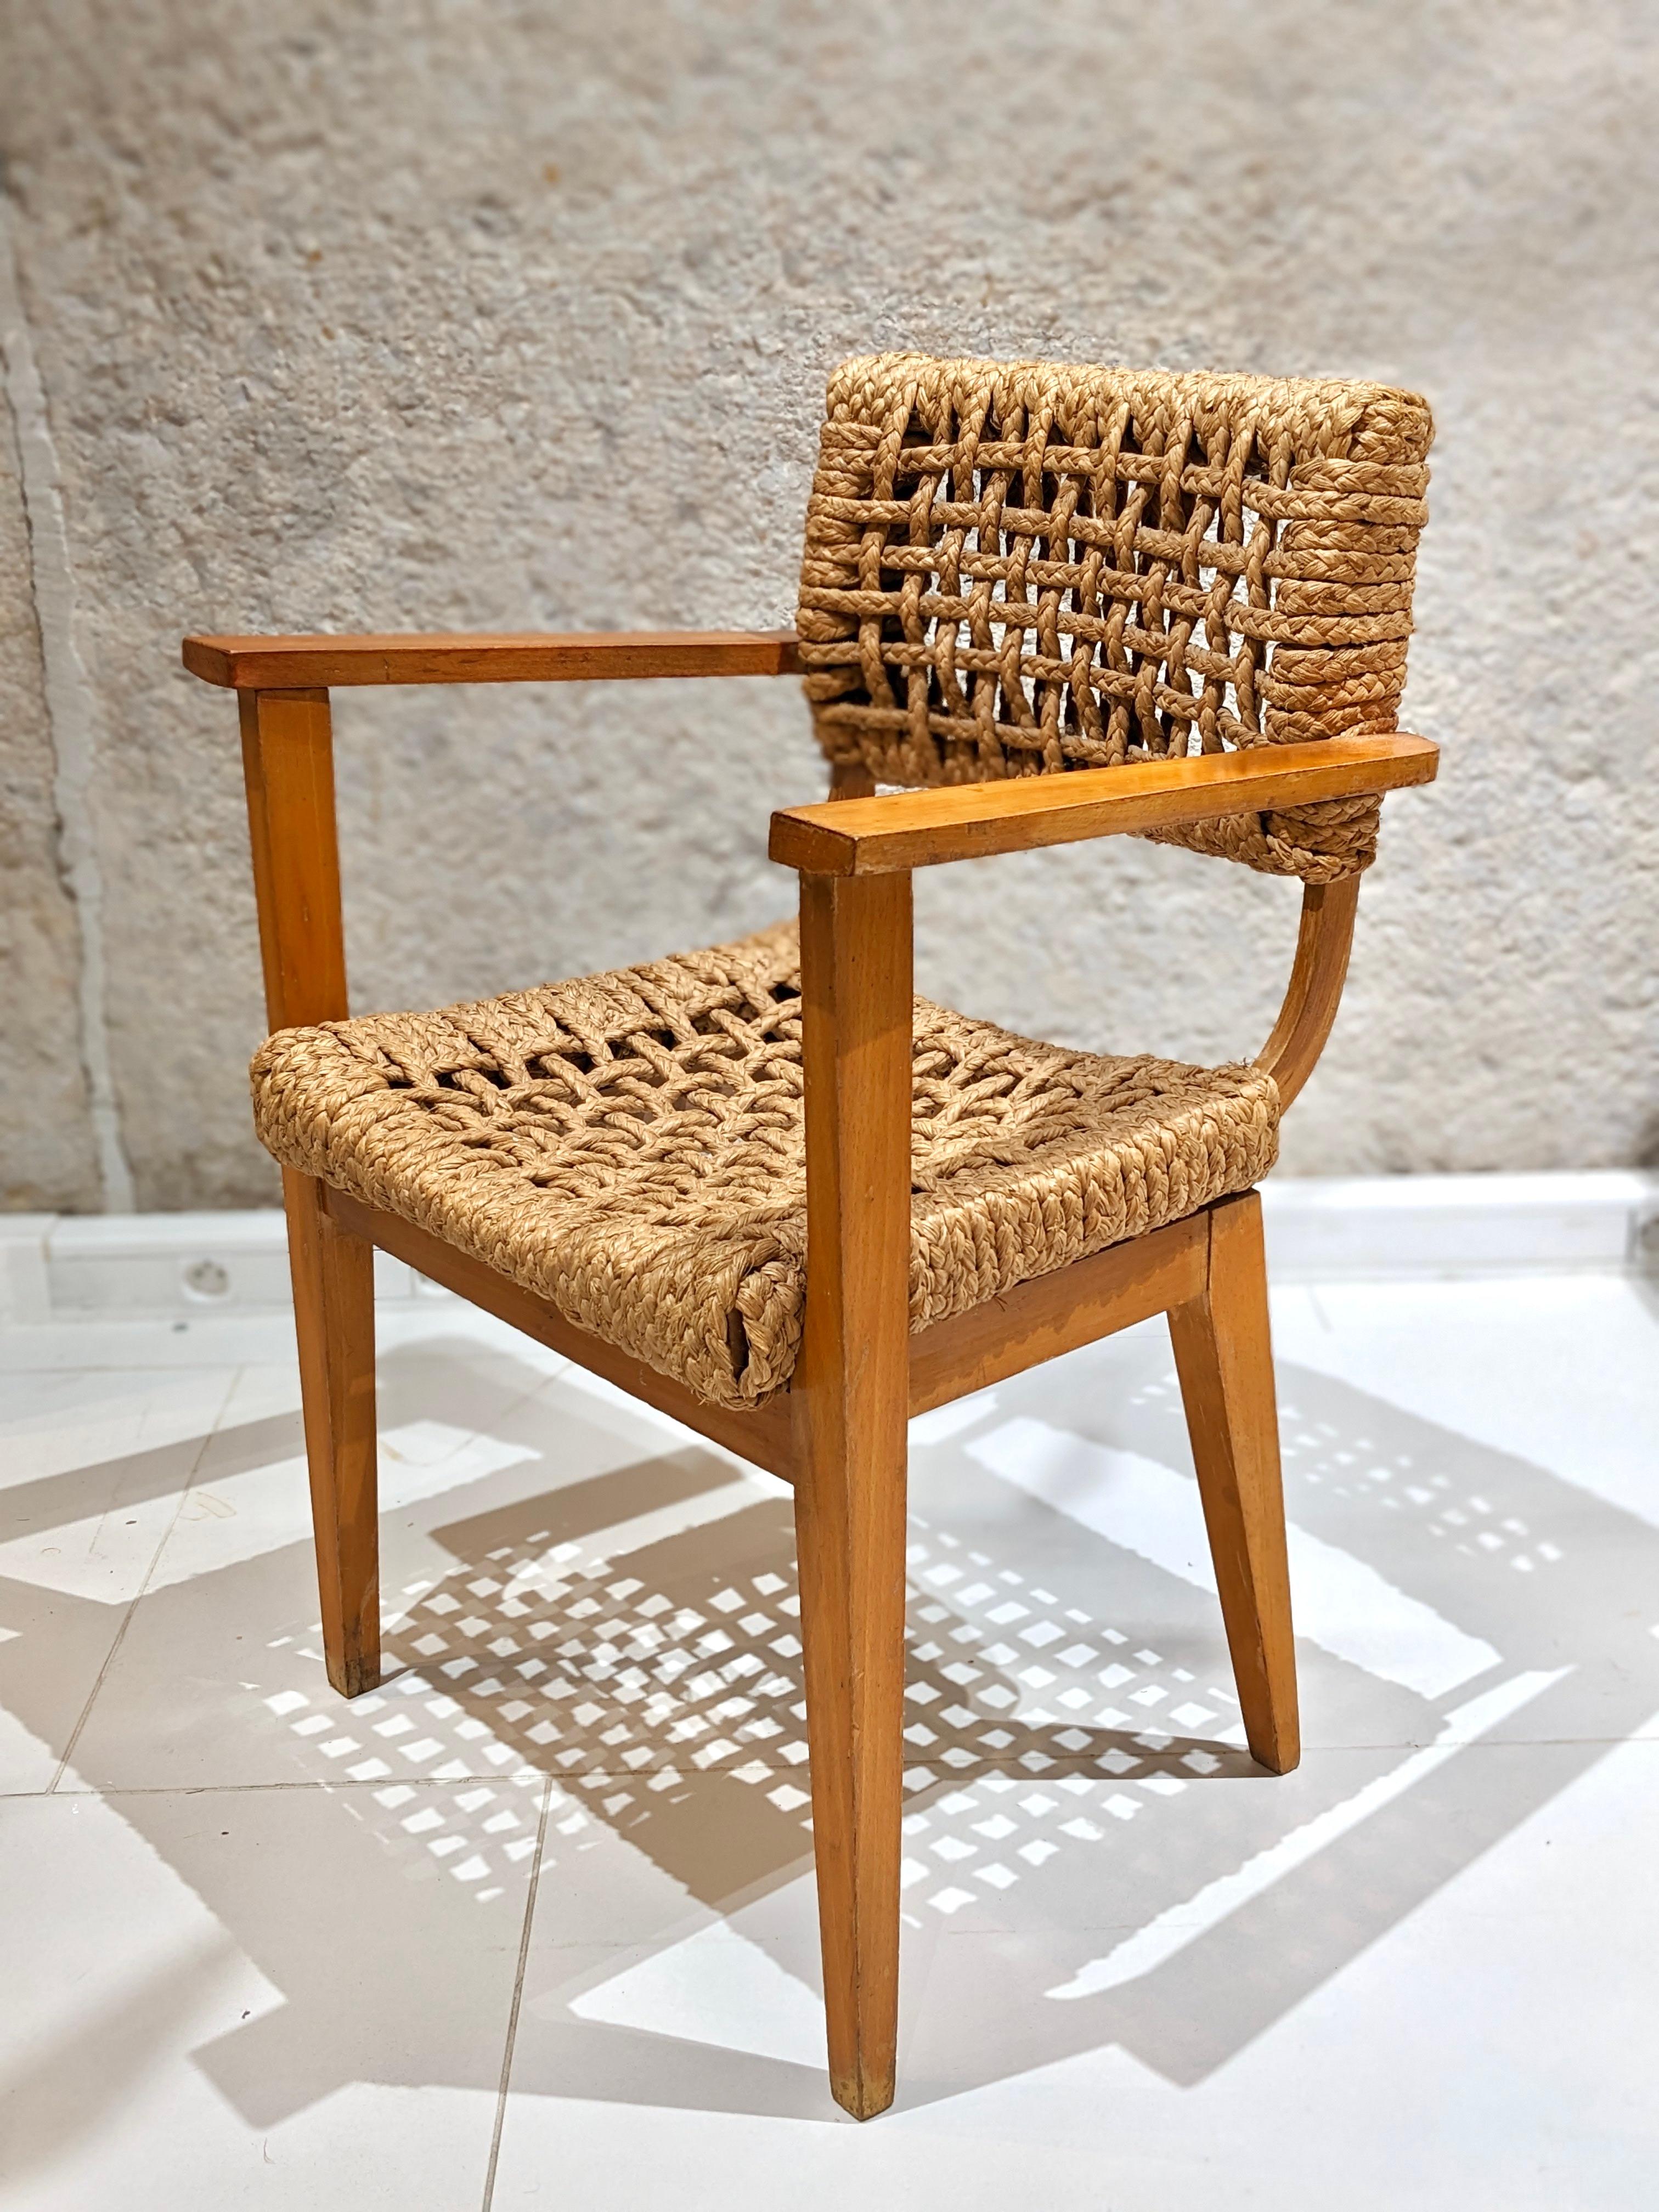 Mid-20th Century Armchair in braided rope by Adrien Audoux and Frida Minet. For Sale